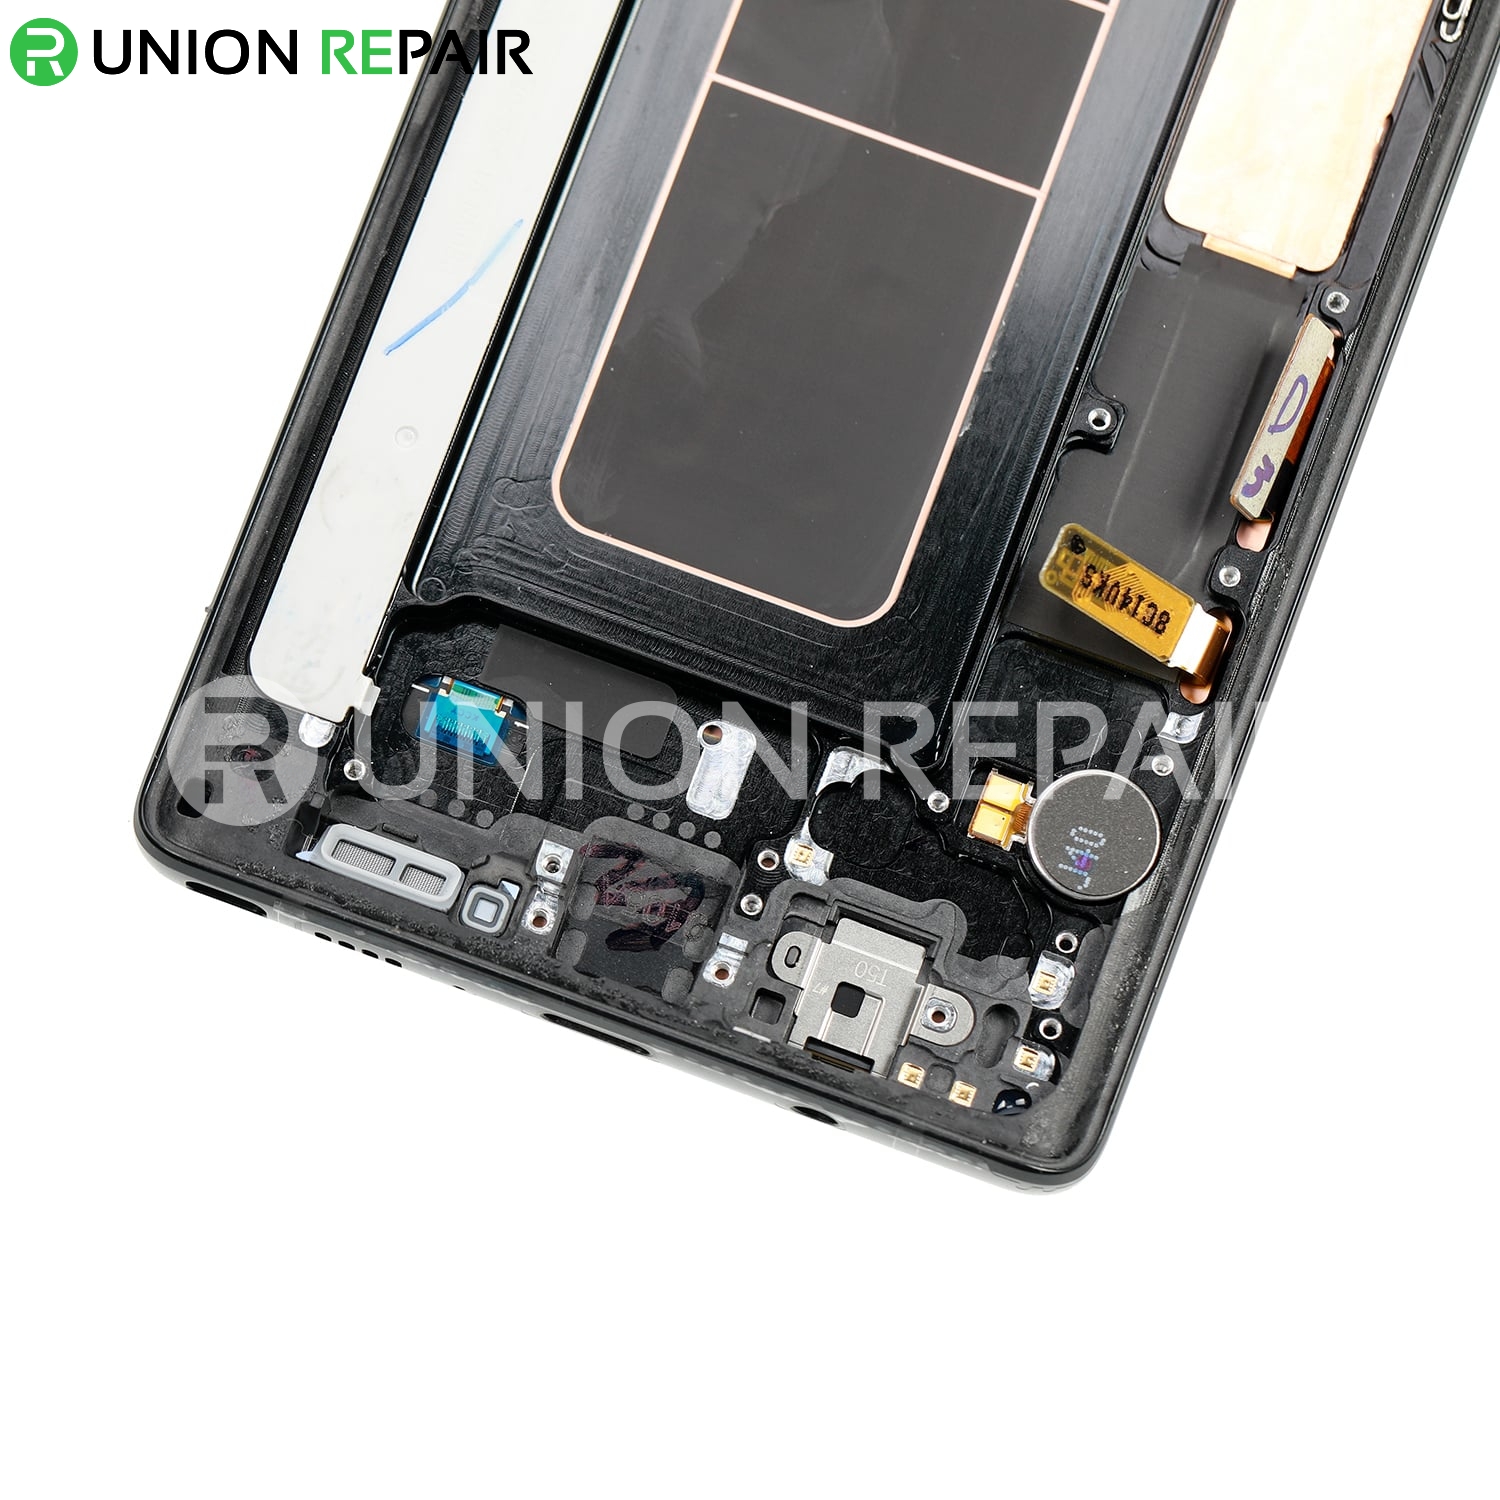 Replacement for Samsung Galaxy Note 9 LCD Screen Digitizer Assembly with Frame - Black